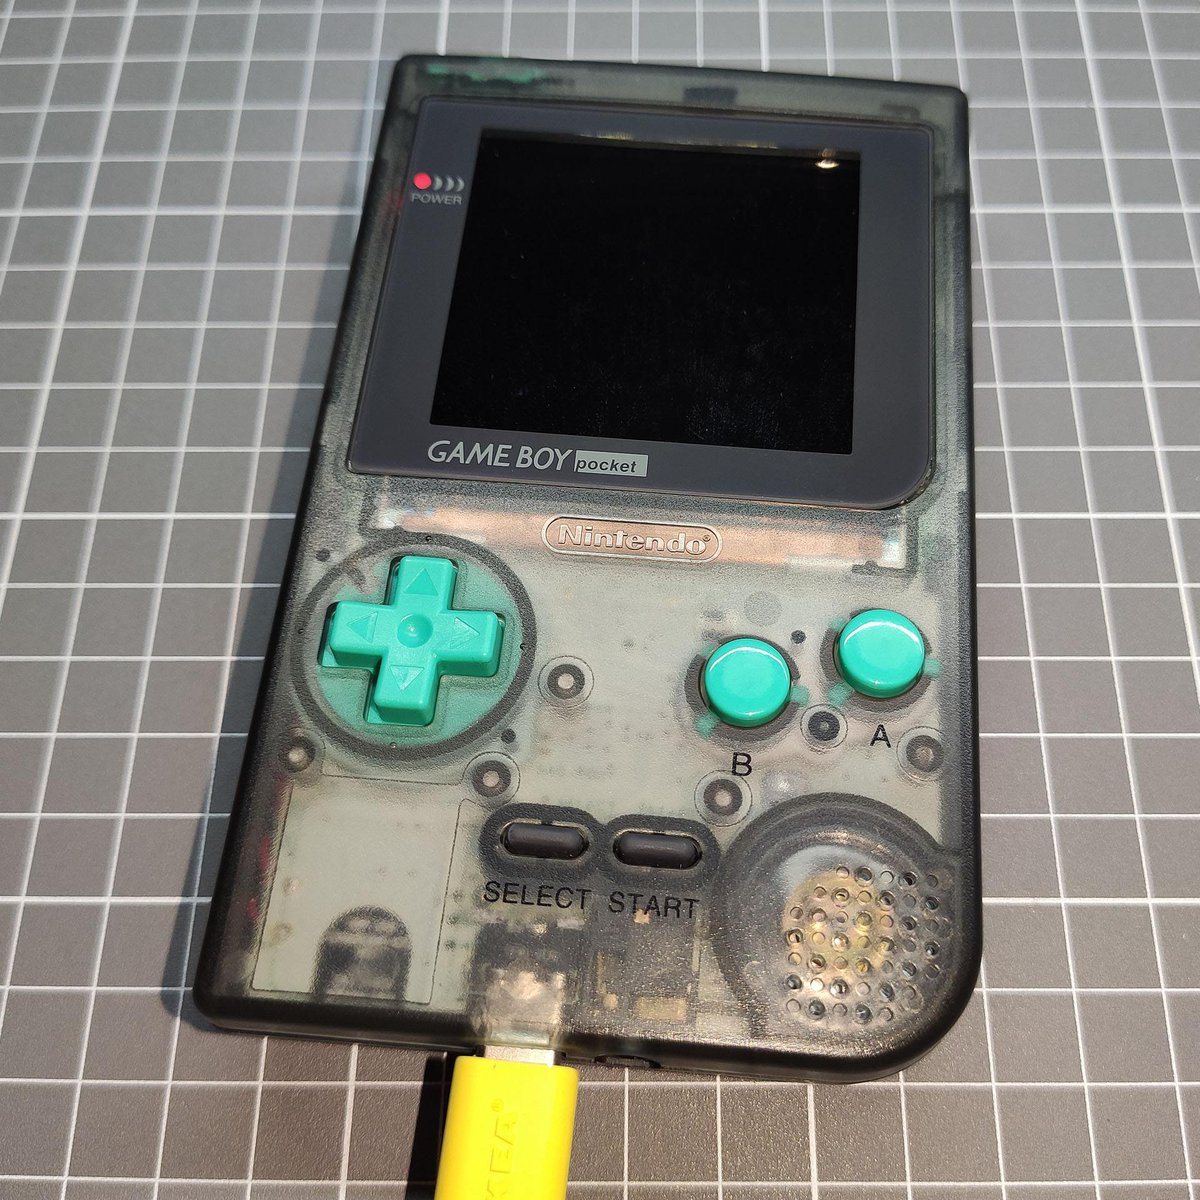 USB-C Charging Kit for Game Boy Color from The giltesa's shop on